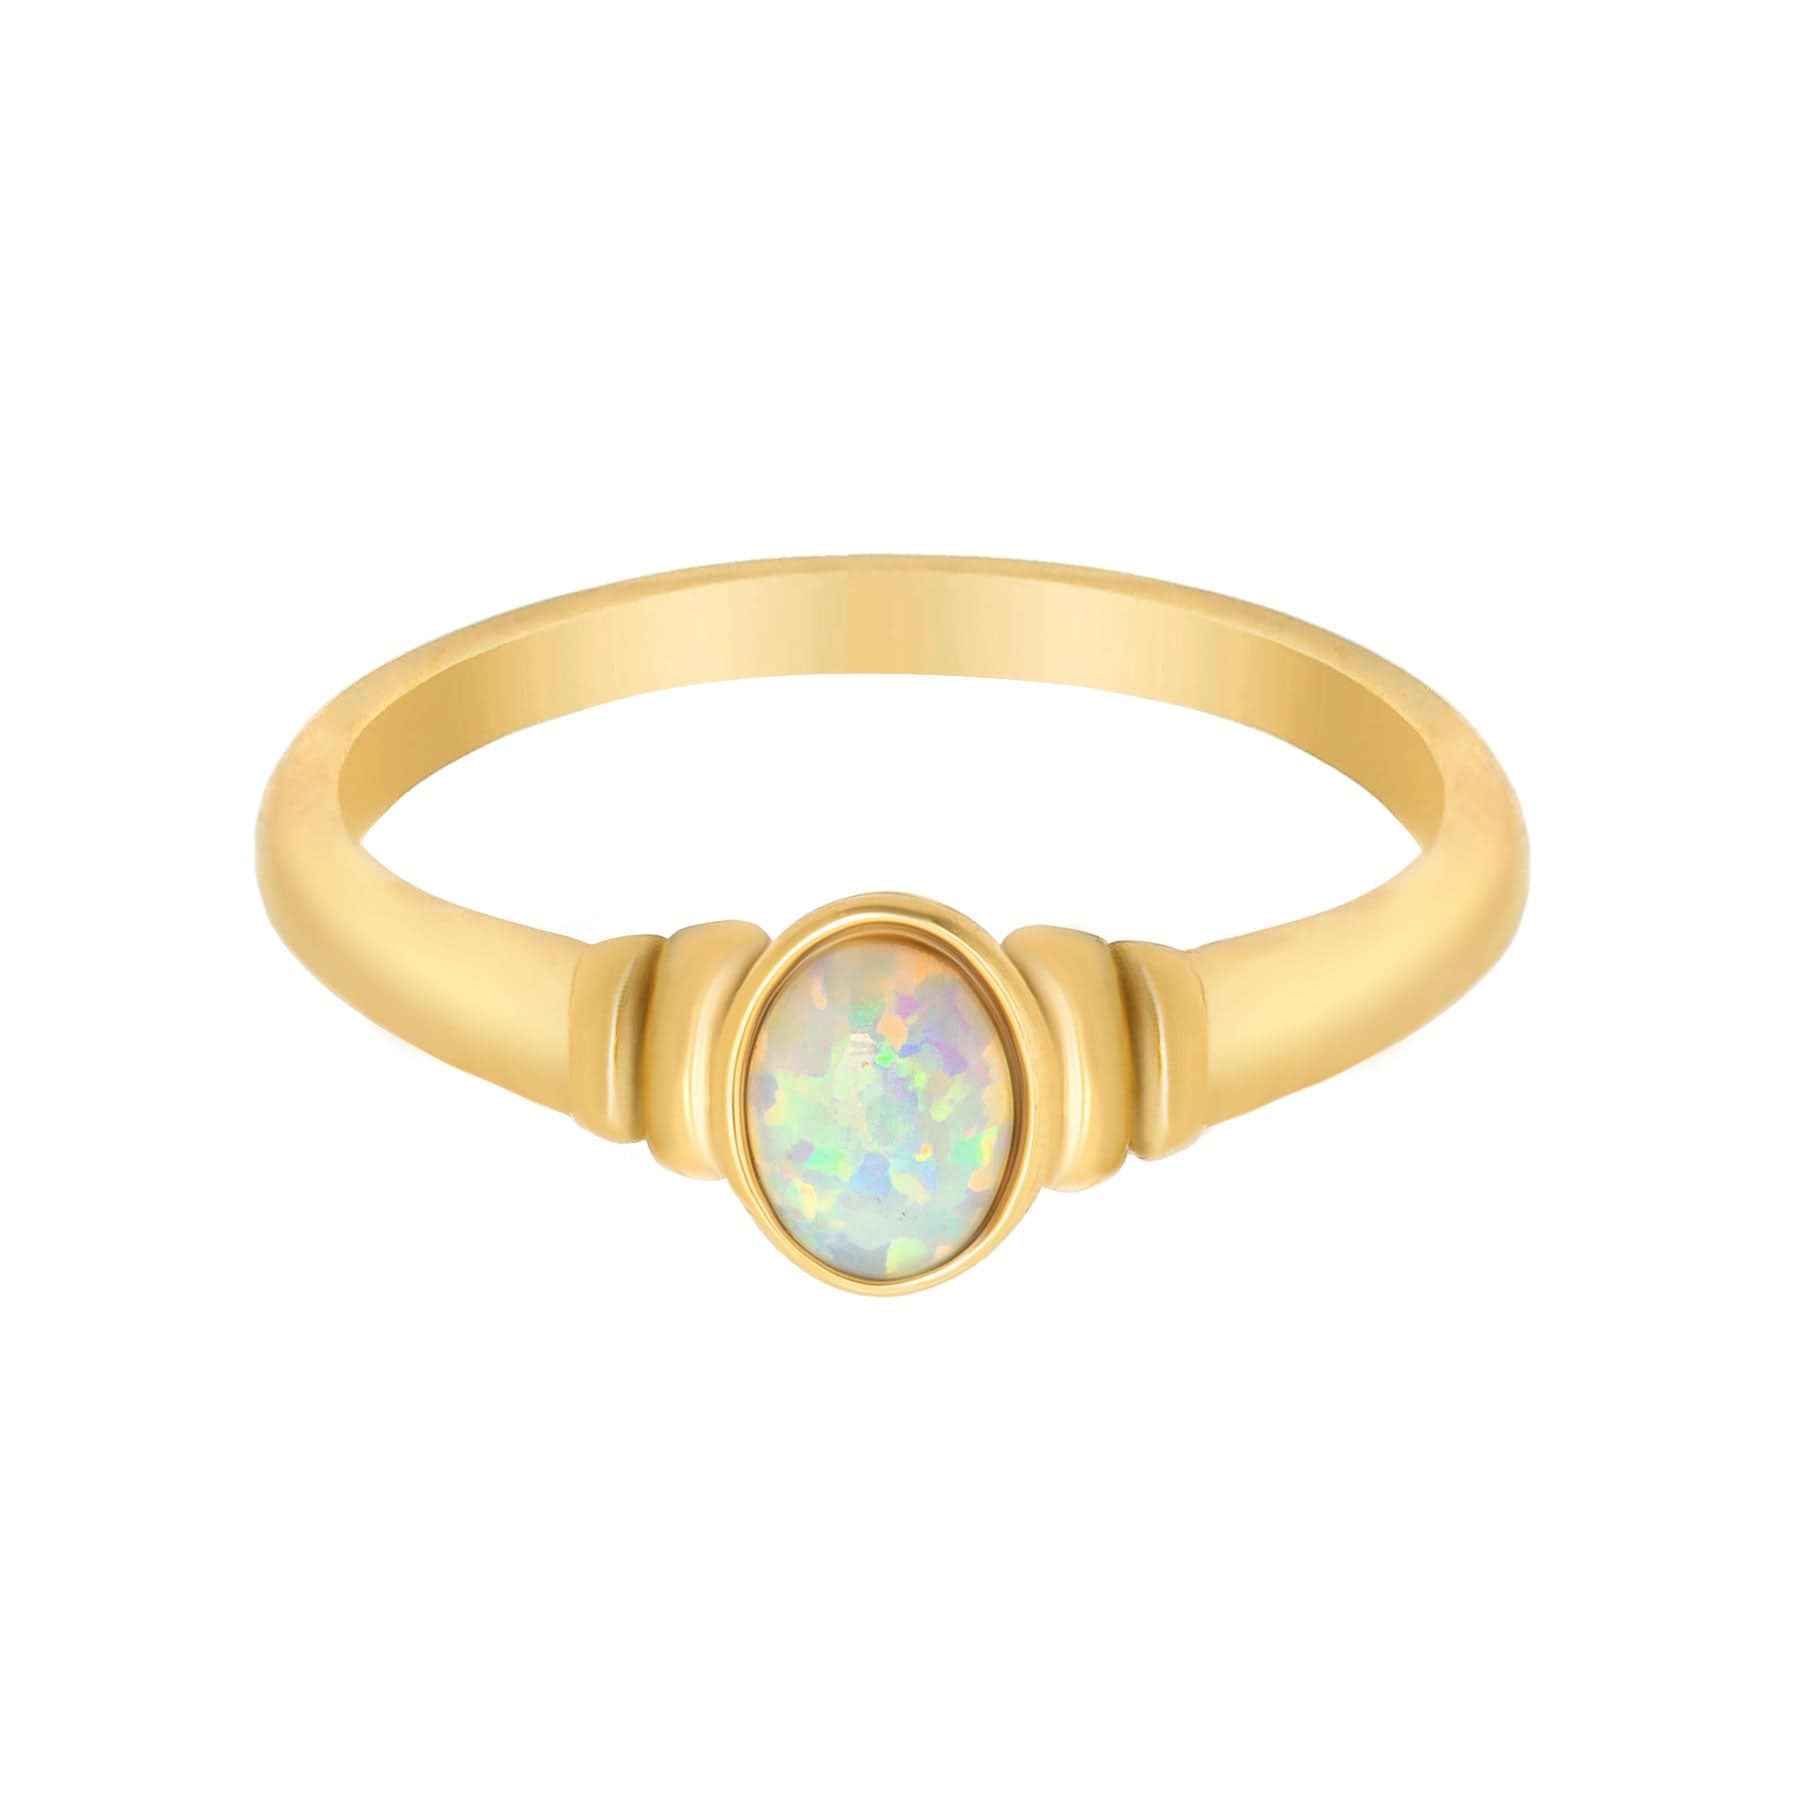 BohoMoon Stainless Steel Mabel Opal Ring Gold / US 6 / UK L / EUR 51 (small)